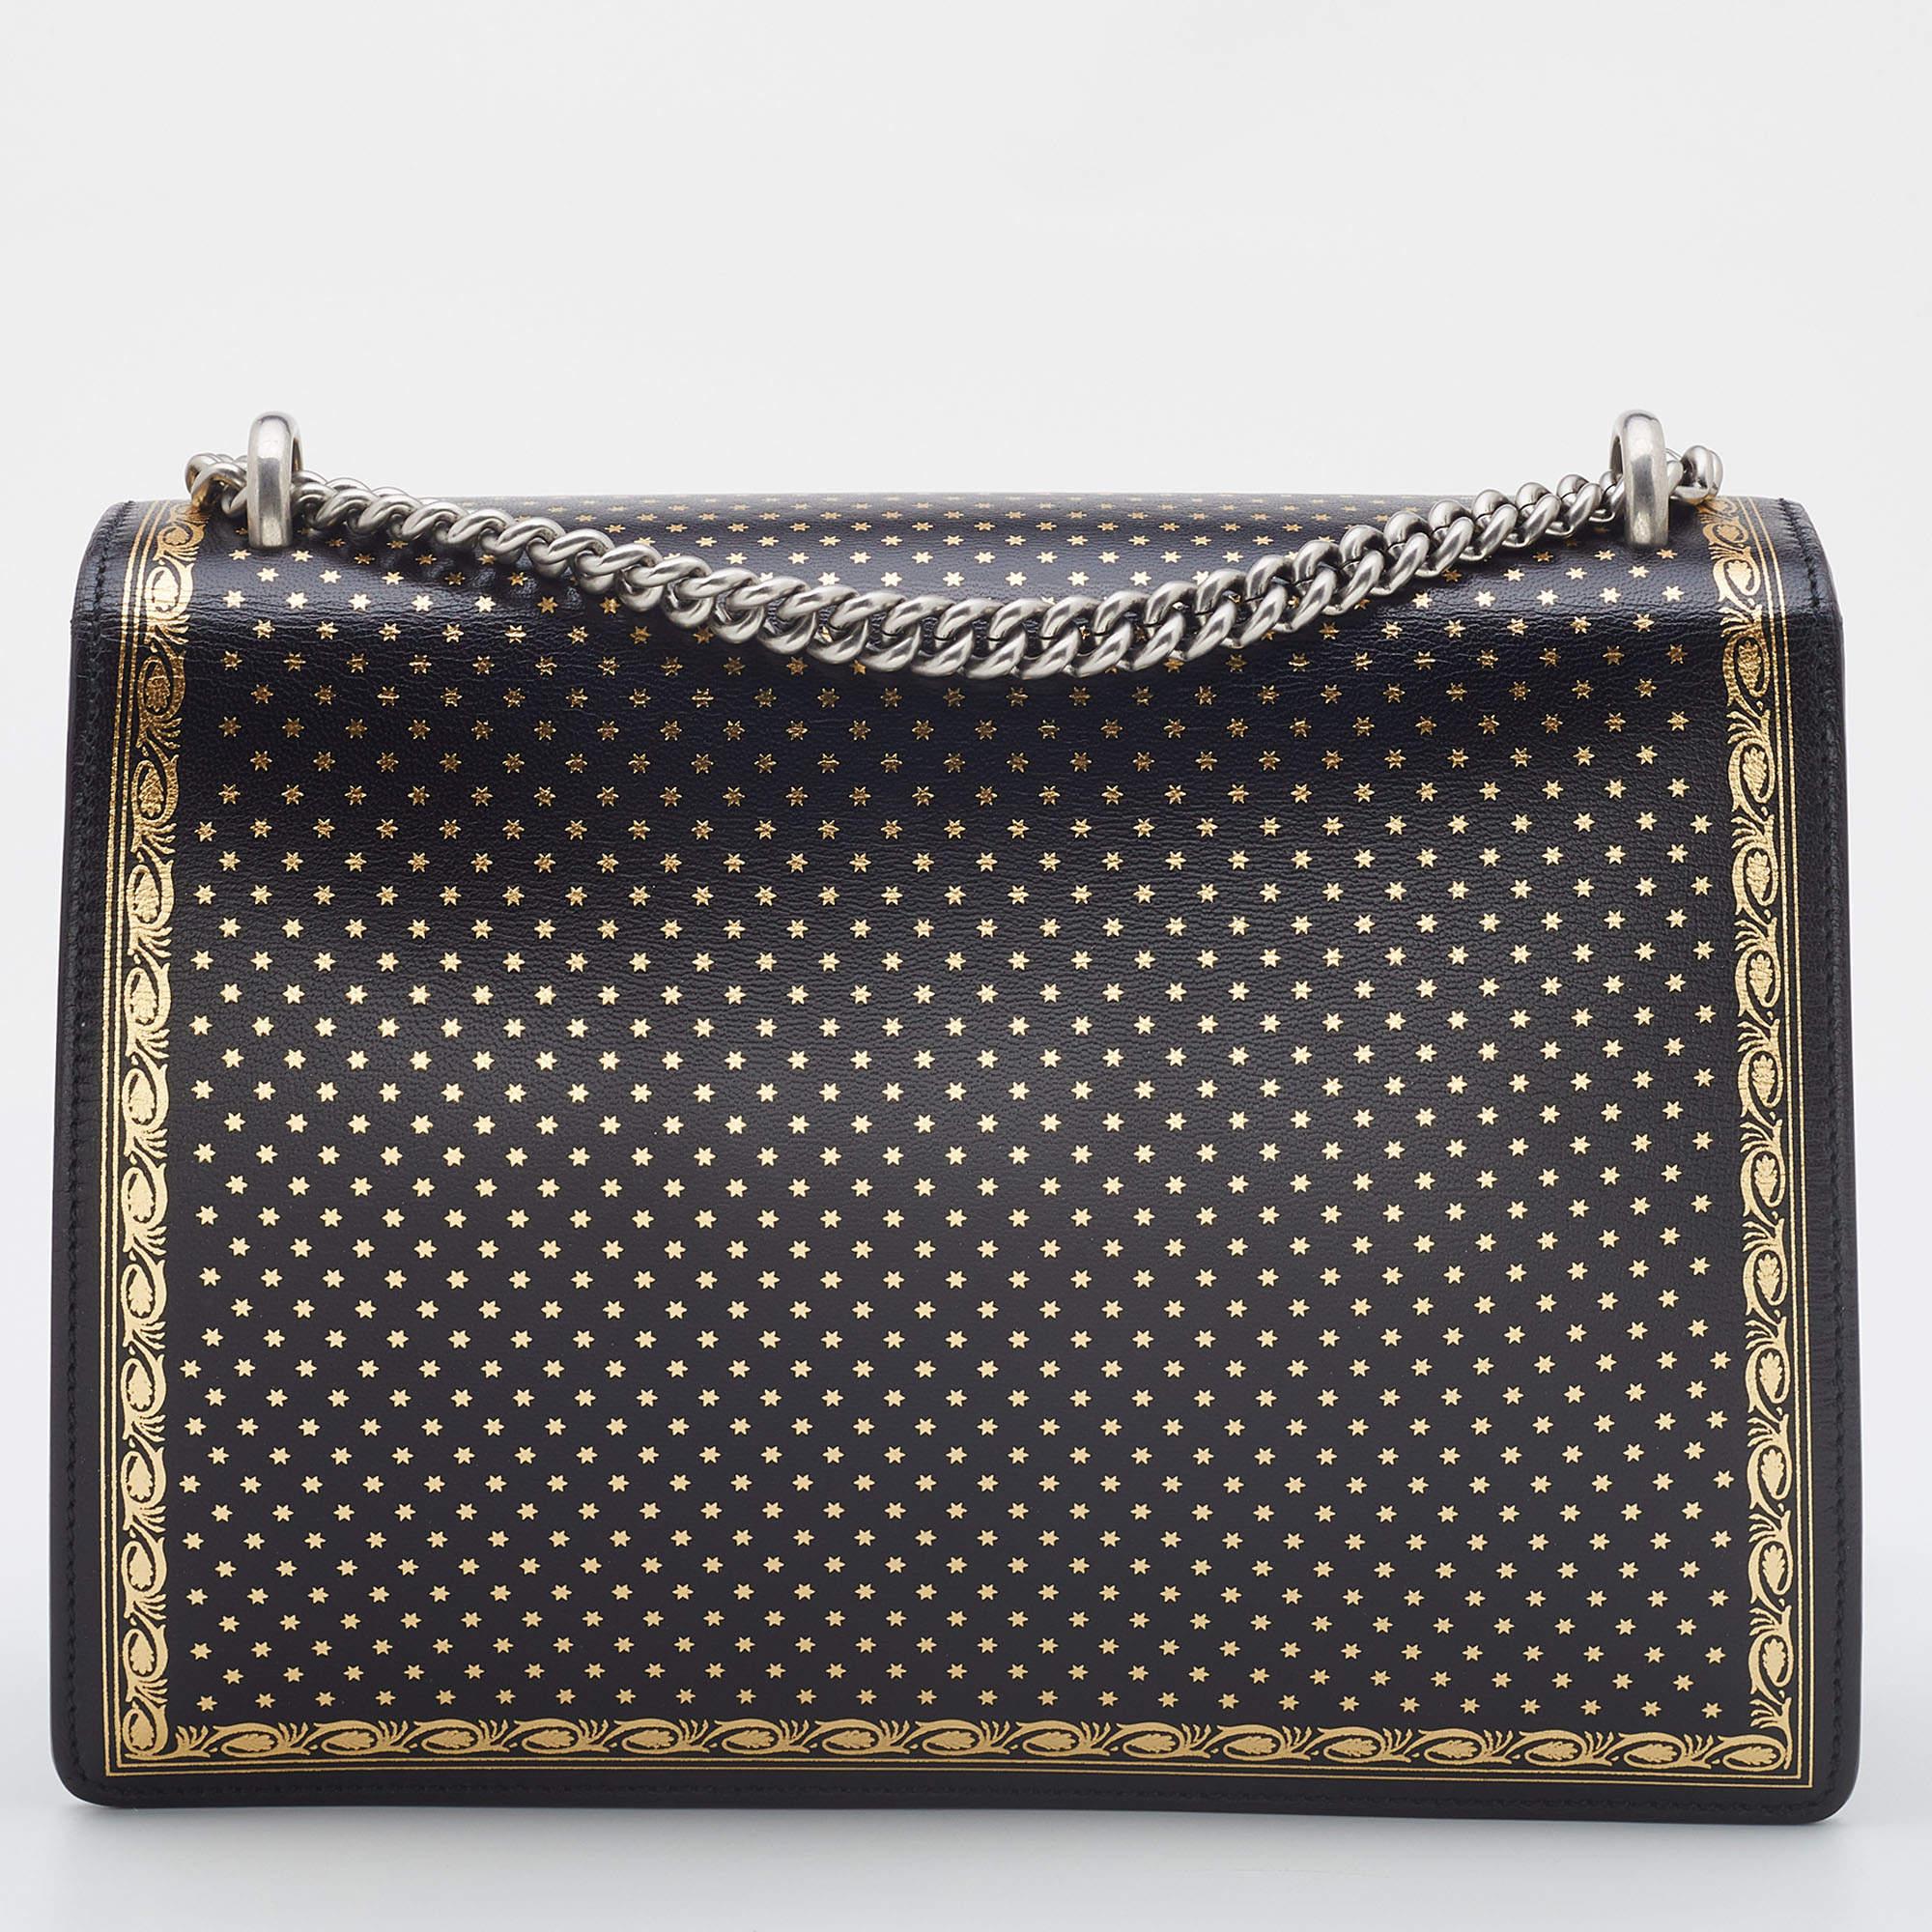 Gucci's statement Dionysus bag comes with an update of 'GUCCY'. Crafted from leather, the bag has a beautiful structure enhanced with signature details and gold patterns on black. A silver-tone chain and fabric compartments add to the utility of